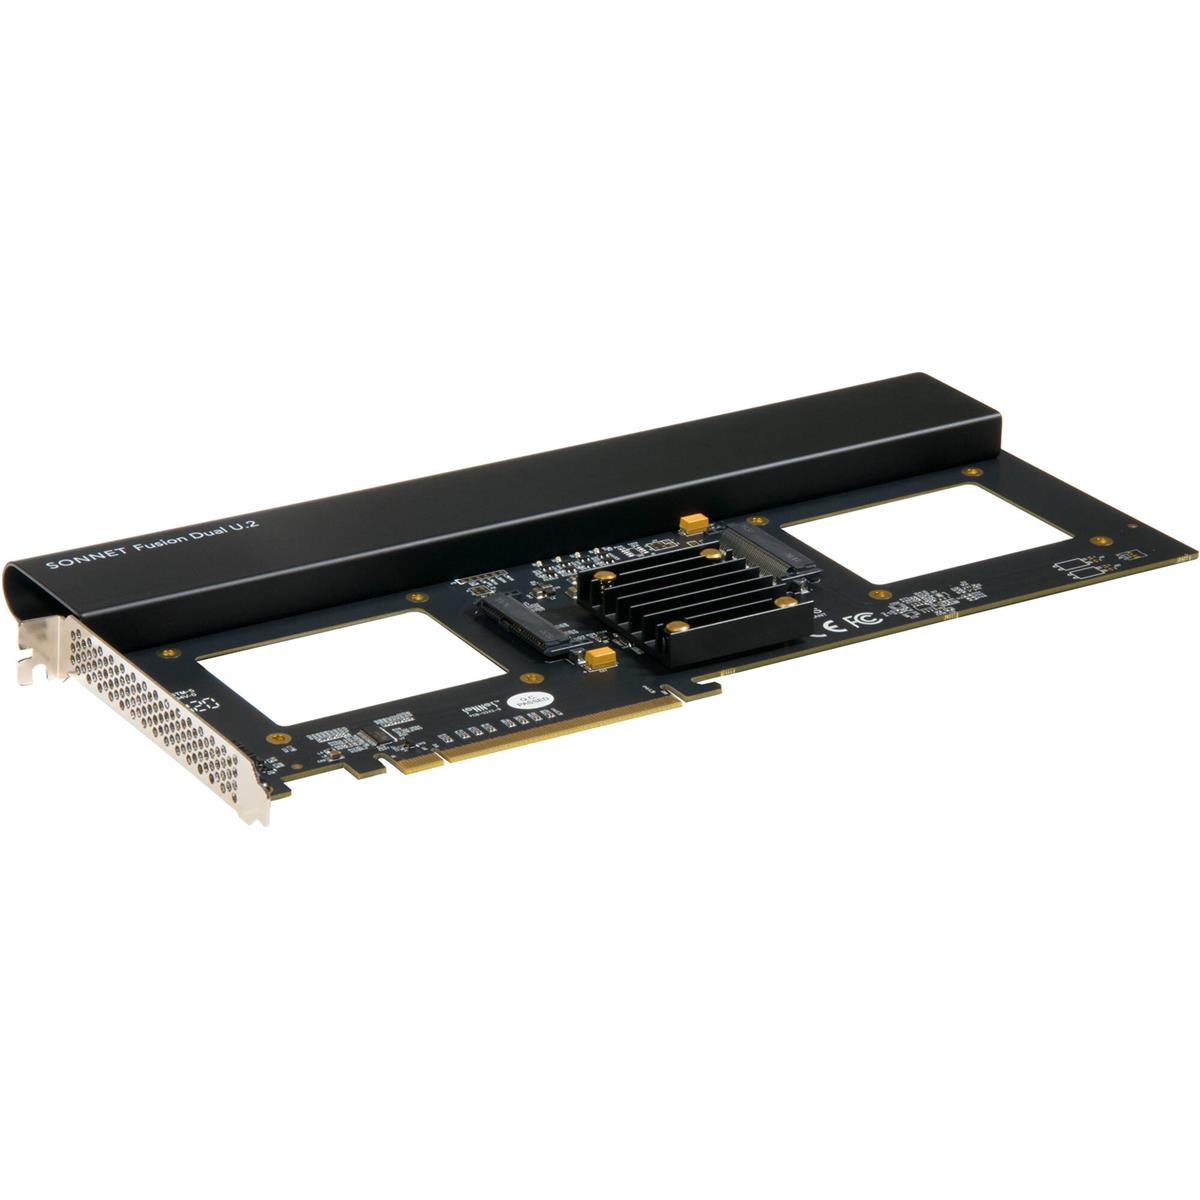 Image of Sonnet Fusion Dual U.2 SSD PCIe Card